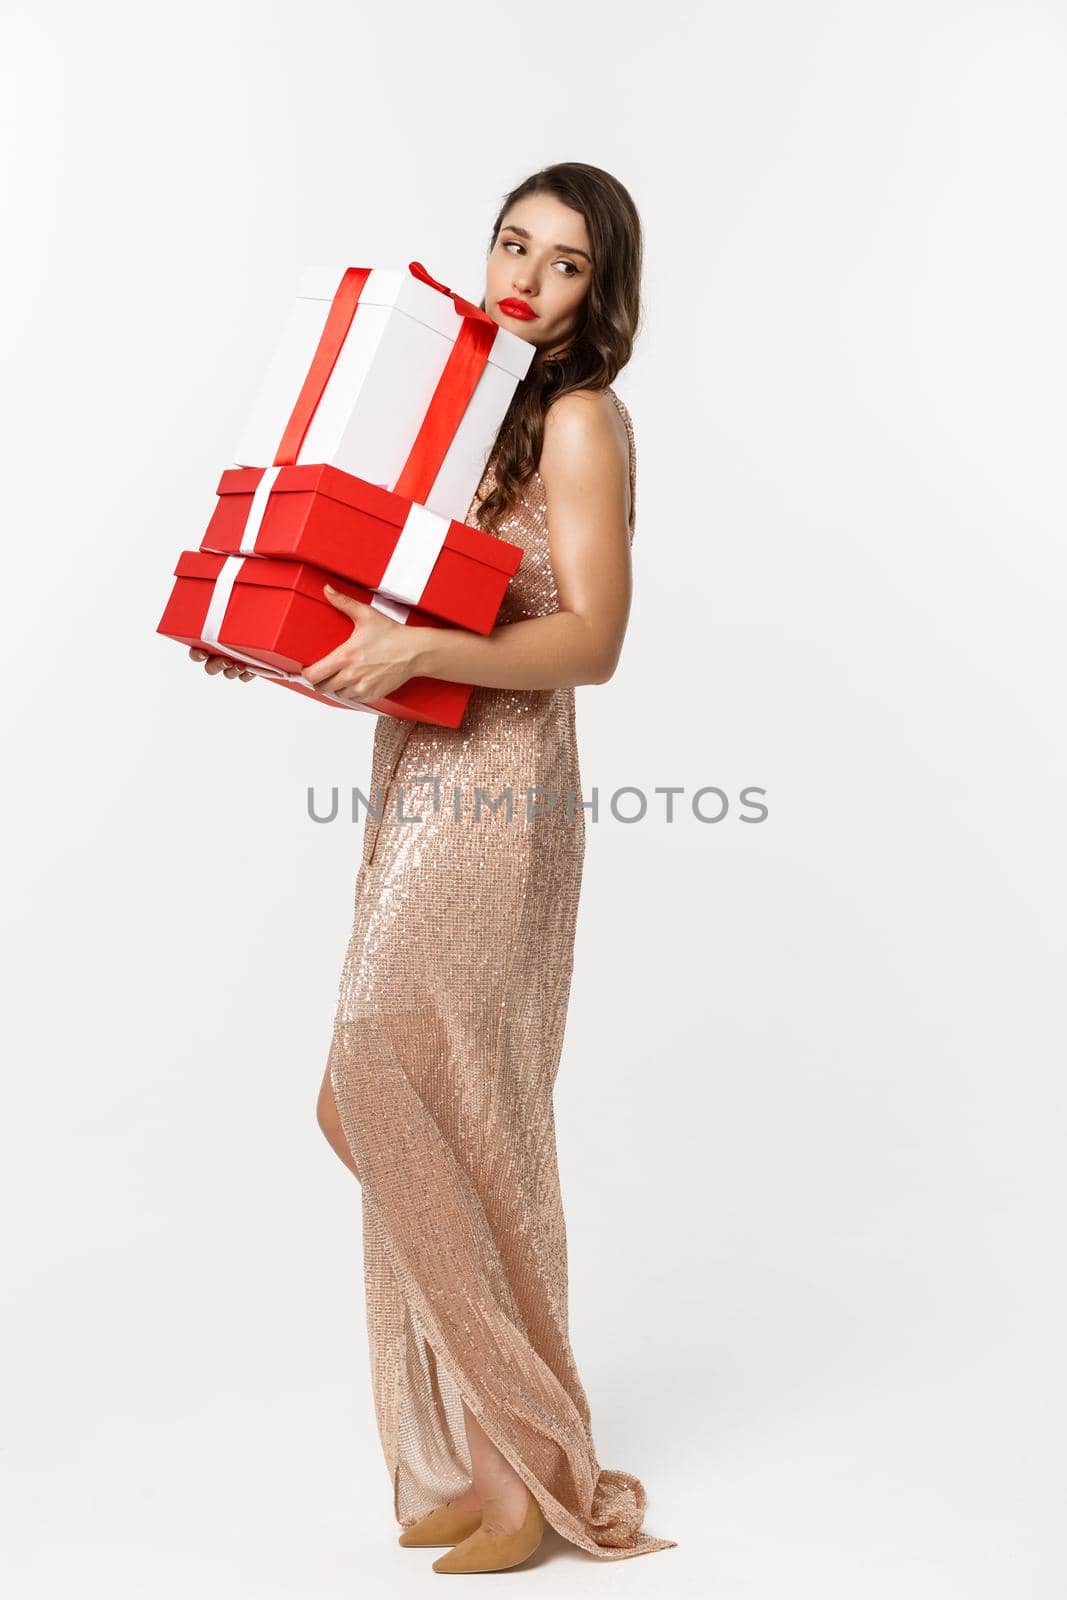 Party and celebration concept. Full-length of attractive glamour woman in elegant dress, holding Christmas gifts and looking tired, white background.